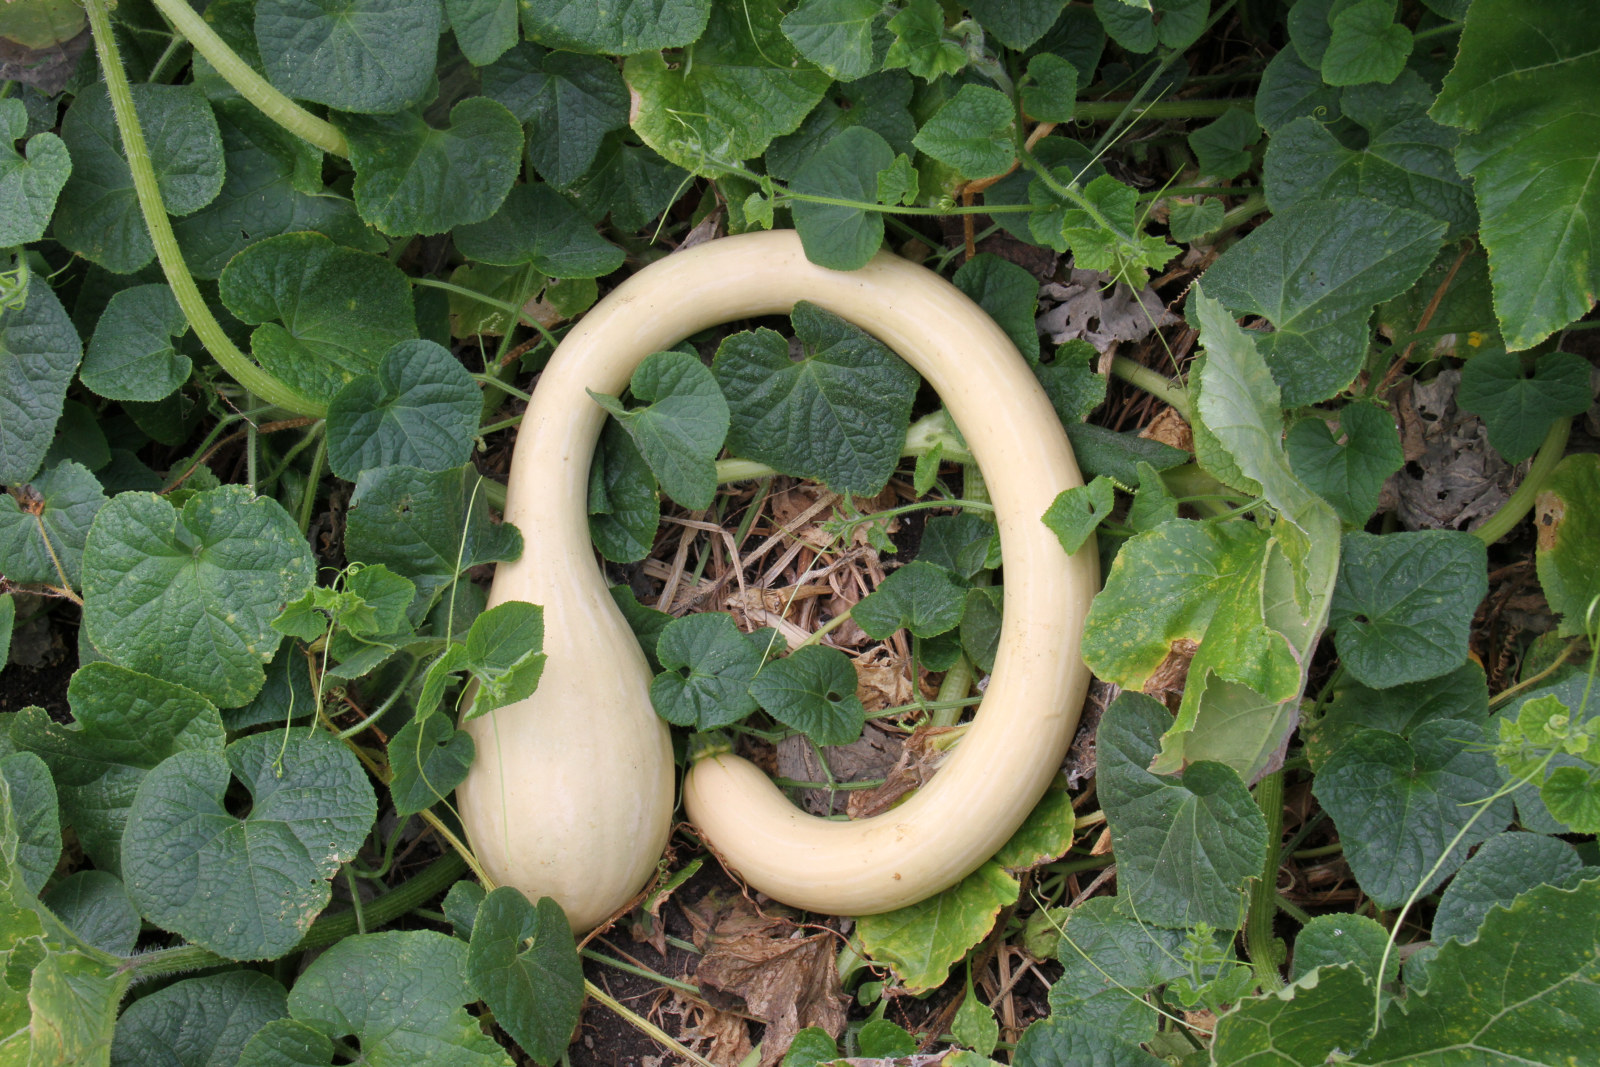 Photograph of a white zucchini on a green background